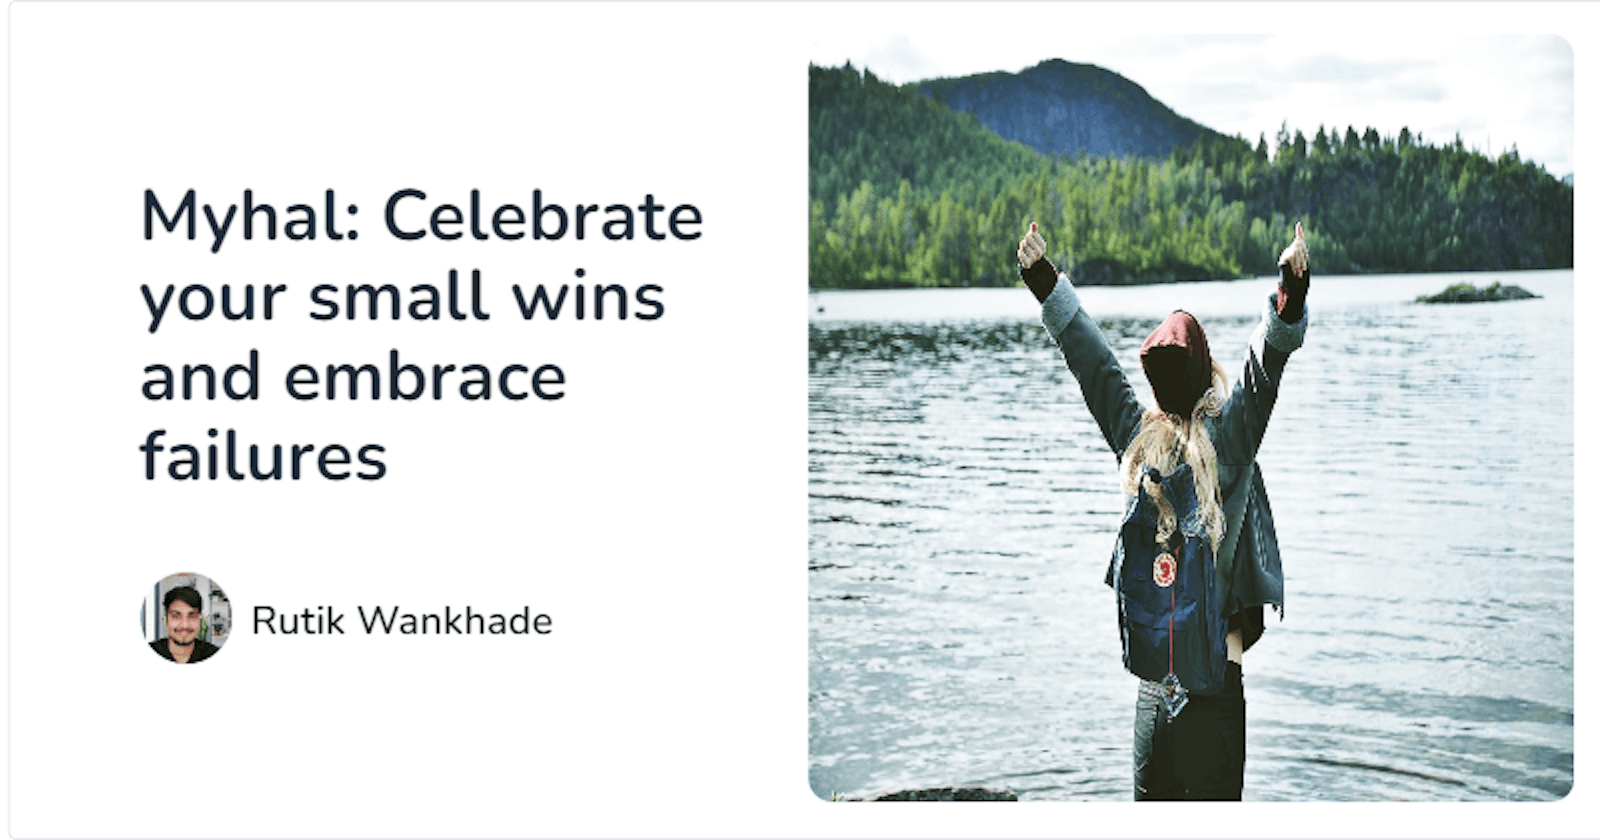 Myhal: Celebrate your small wins and embrace failures